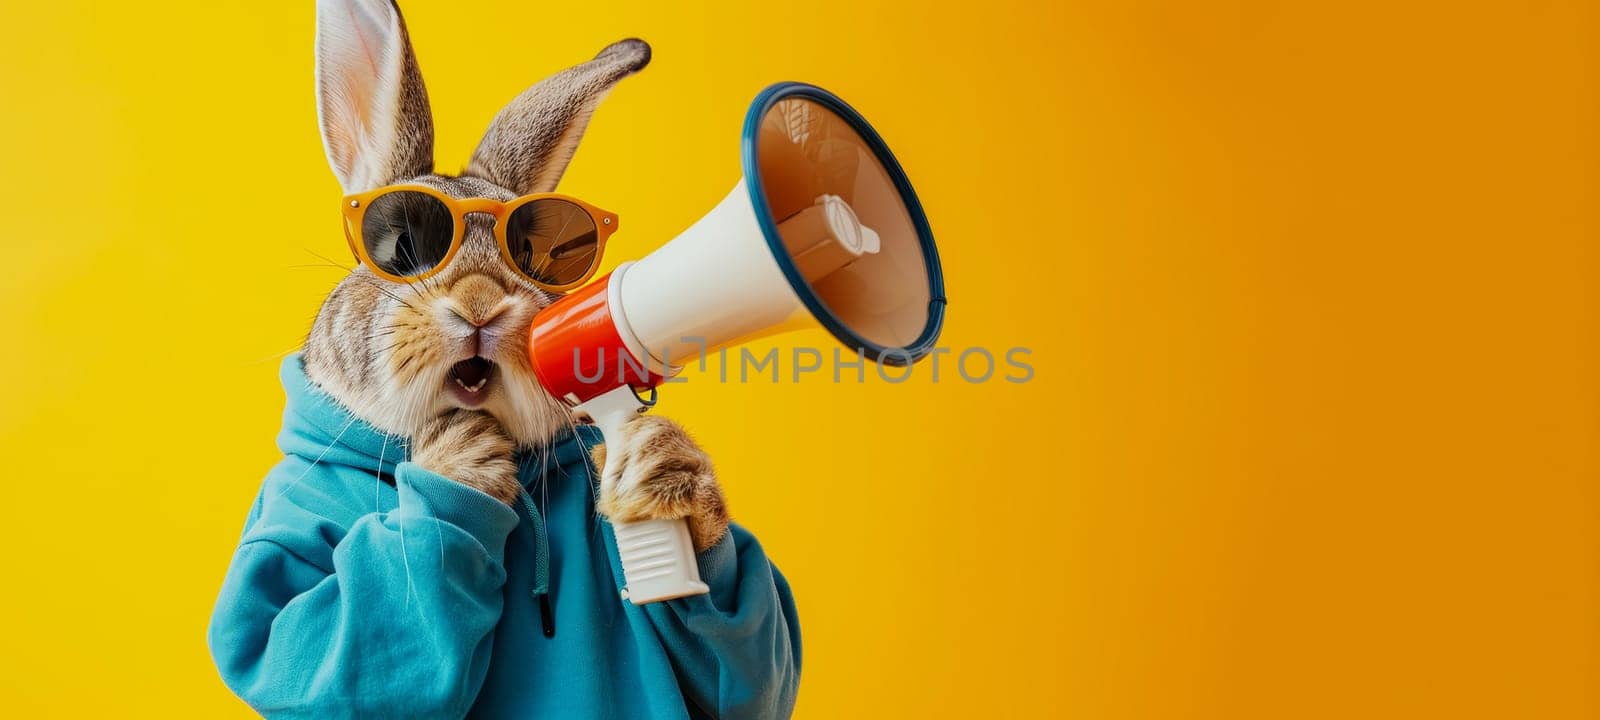 A stylized rabbit in a blue hoodie and sunglasses holds a megaphone